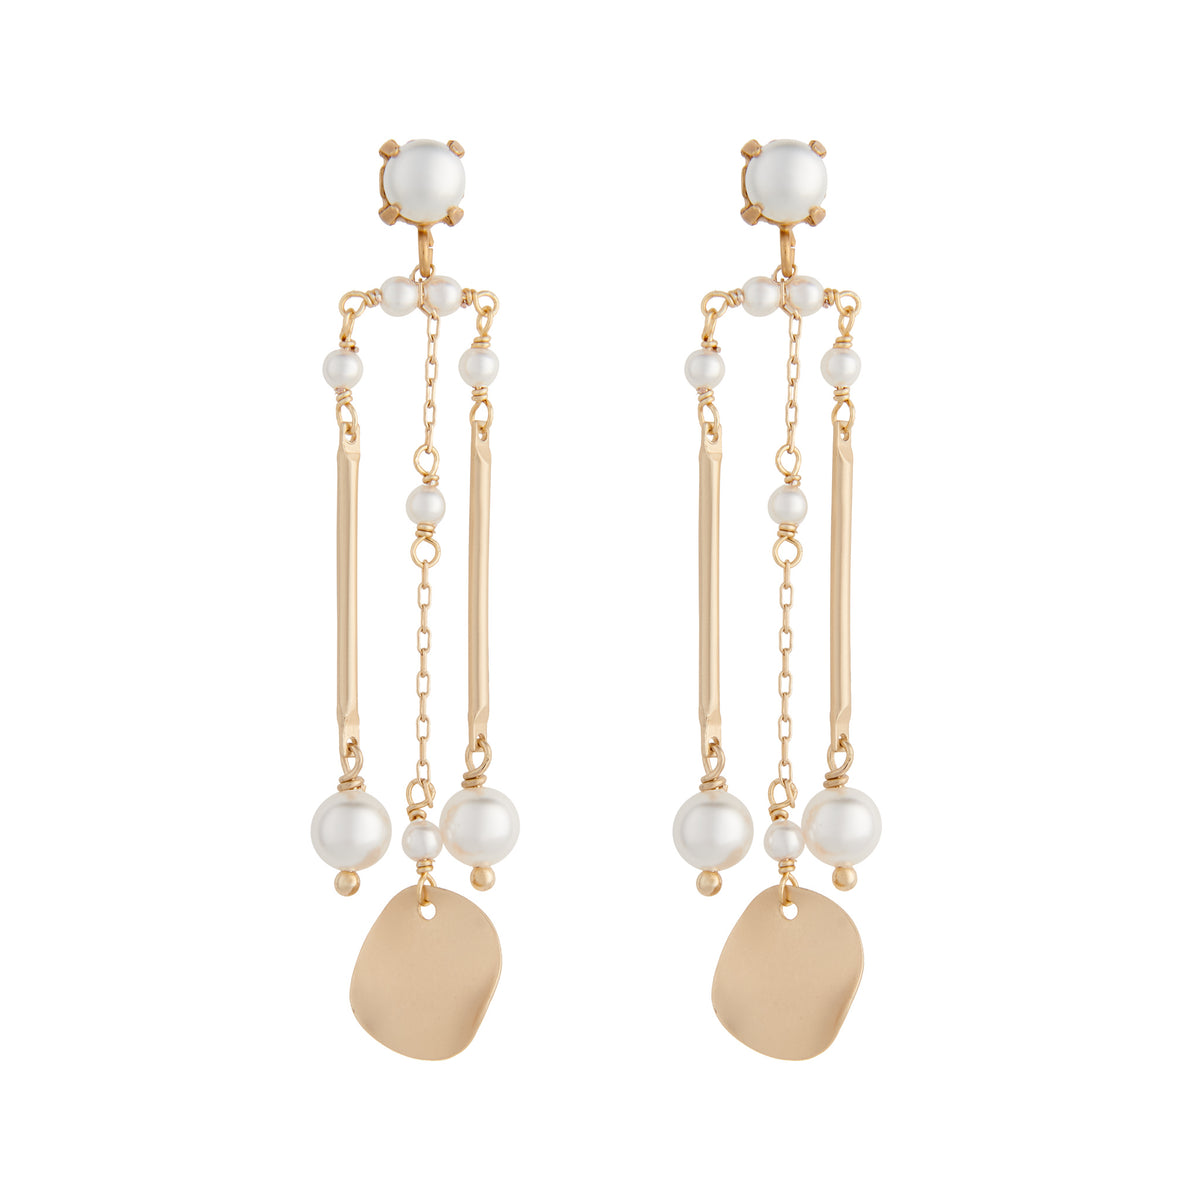 Matte gold column earrings with white pearls by vivien walsh